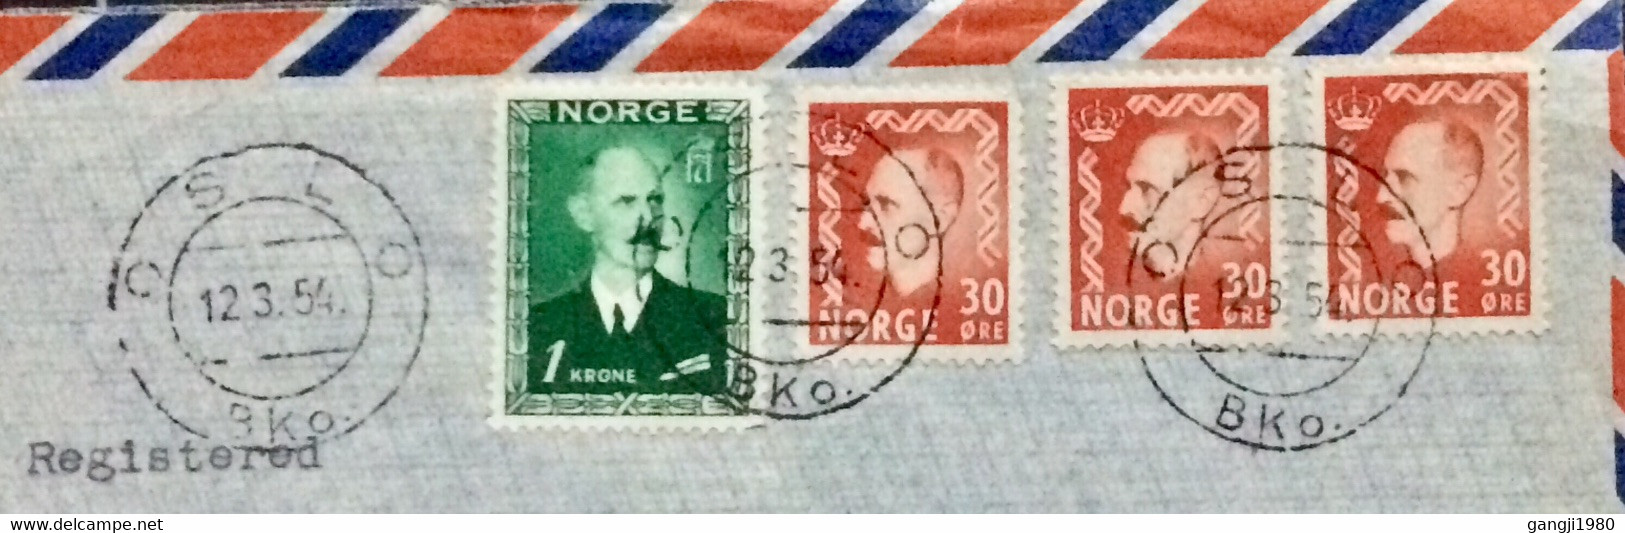 NORWAY 1954, PRIVATE COVER “EIDE” FIRM, USED TO USA,KING HARKON 4 STAMPS, REGISTER OSLO & DETROIT CITY CANCEL. - Cartas & Documentos